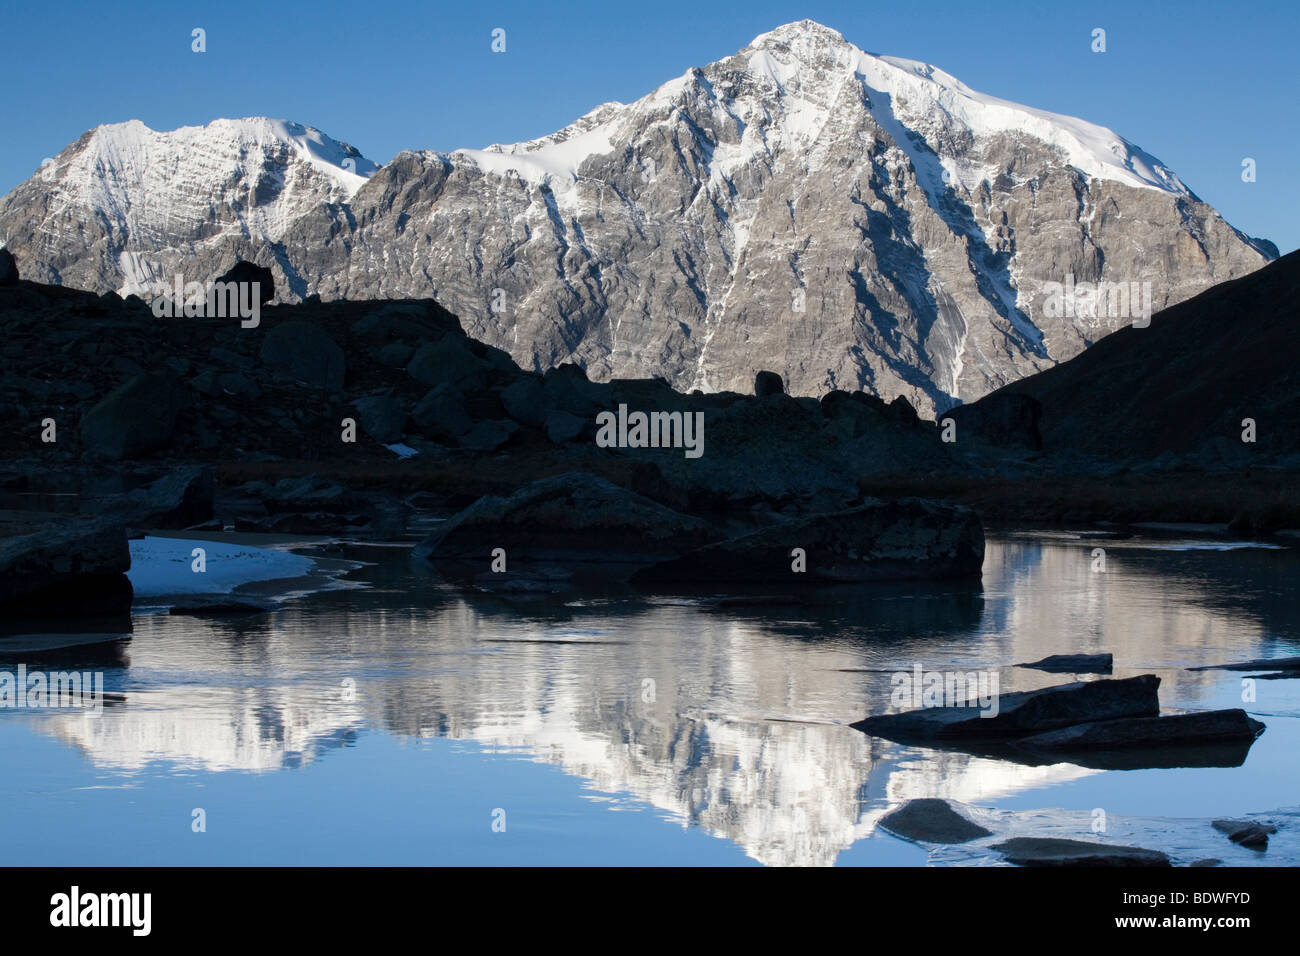 Mt. Ortler reflected in a mountain stream, Sulden, Ortler mountain range, Stelvio National Park, South Tyrol, Italy, Europe Stock Photo